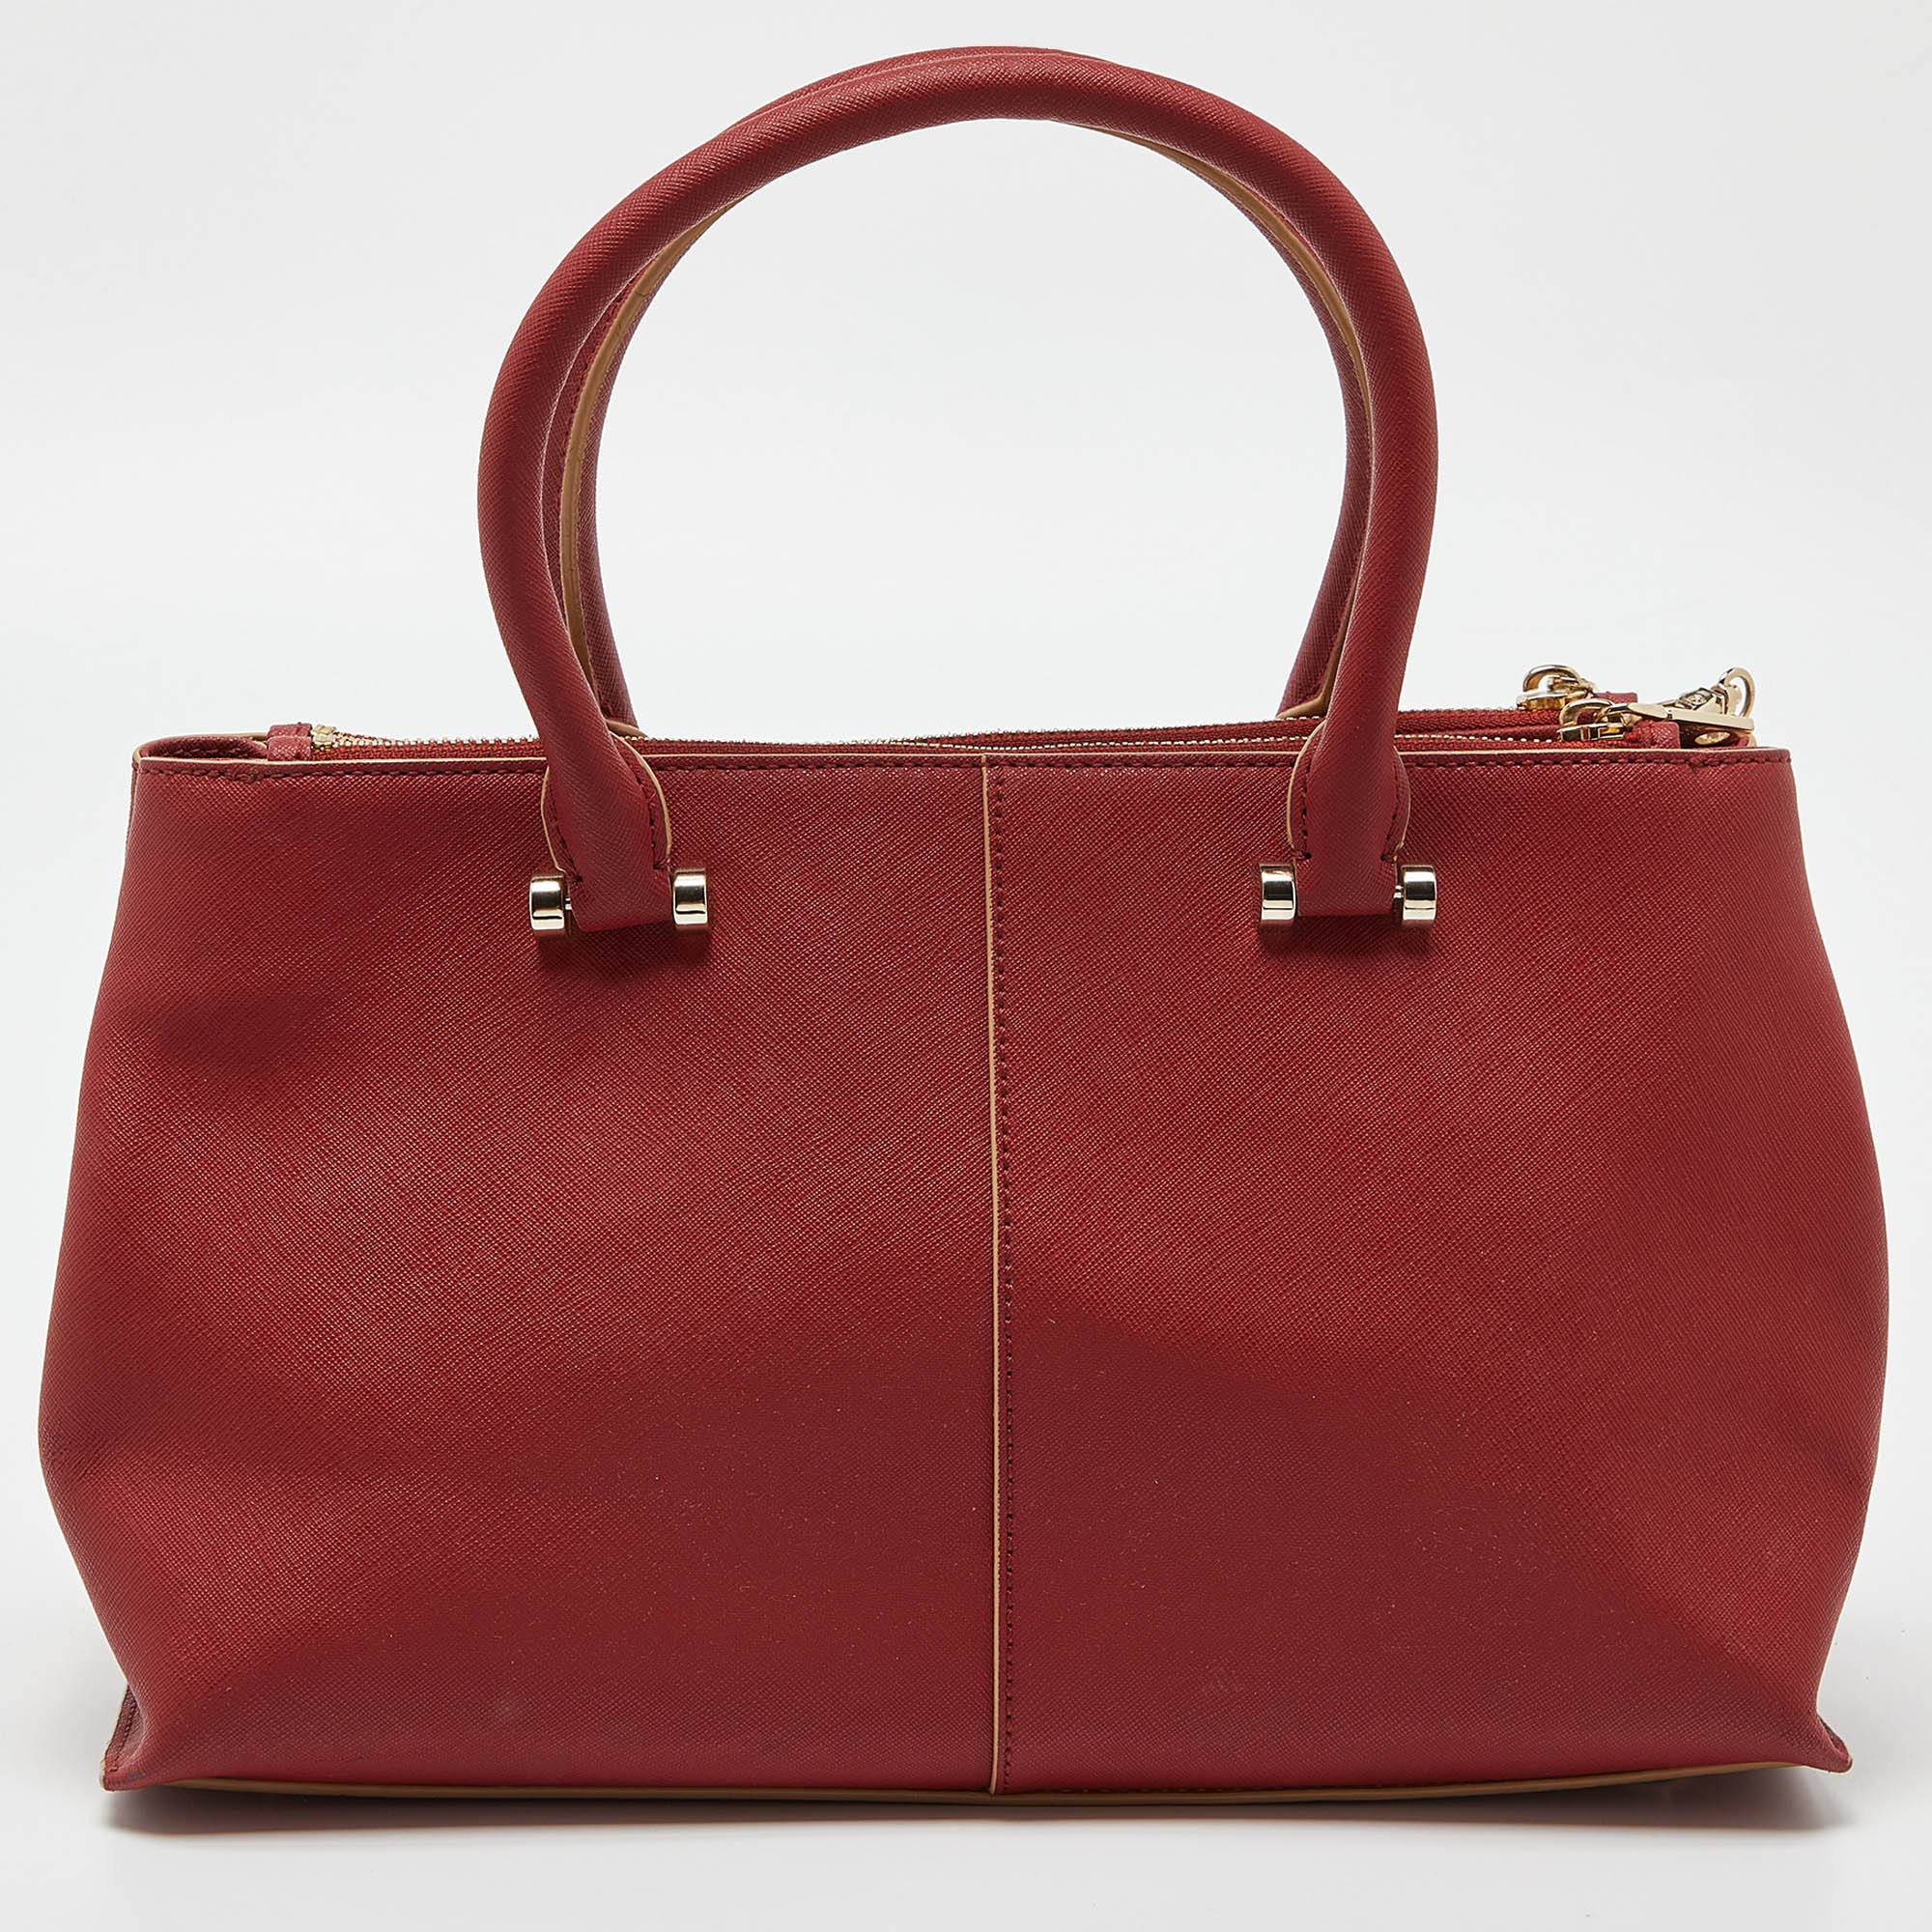 DKNY Red Leather Bryant Park Double Zip Shopper Tote